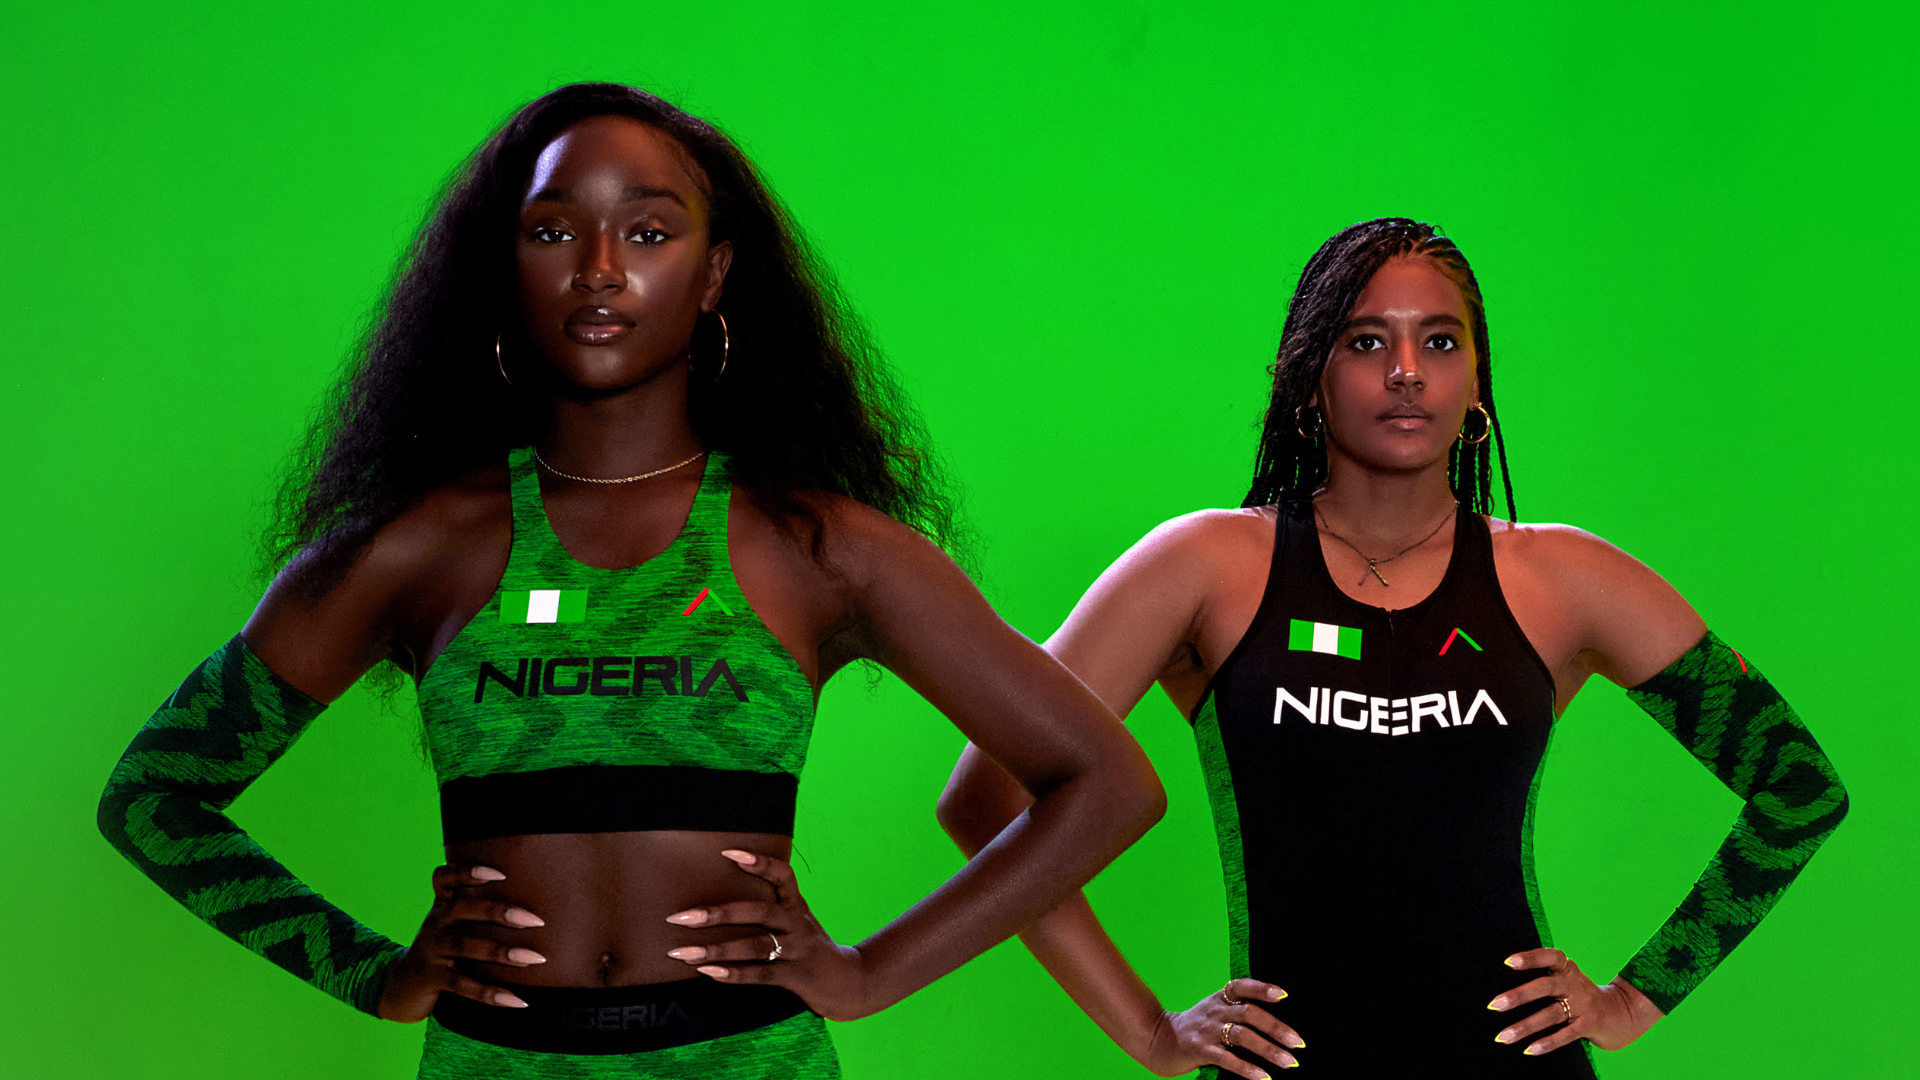 The Nigerian Olympic Uniform By Actively Black Is A Nod To Community